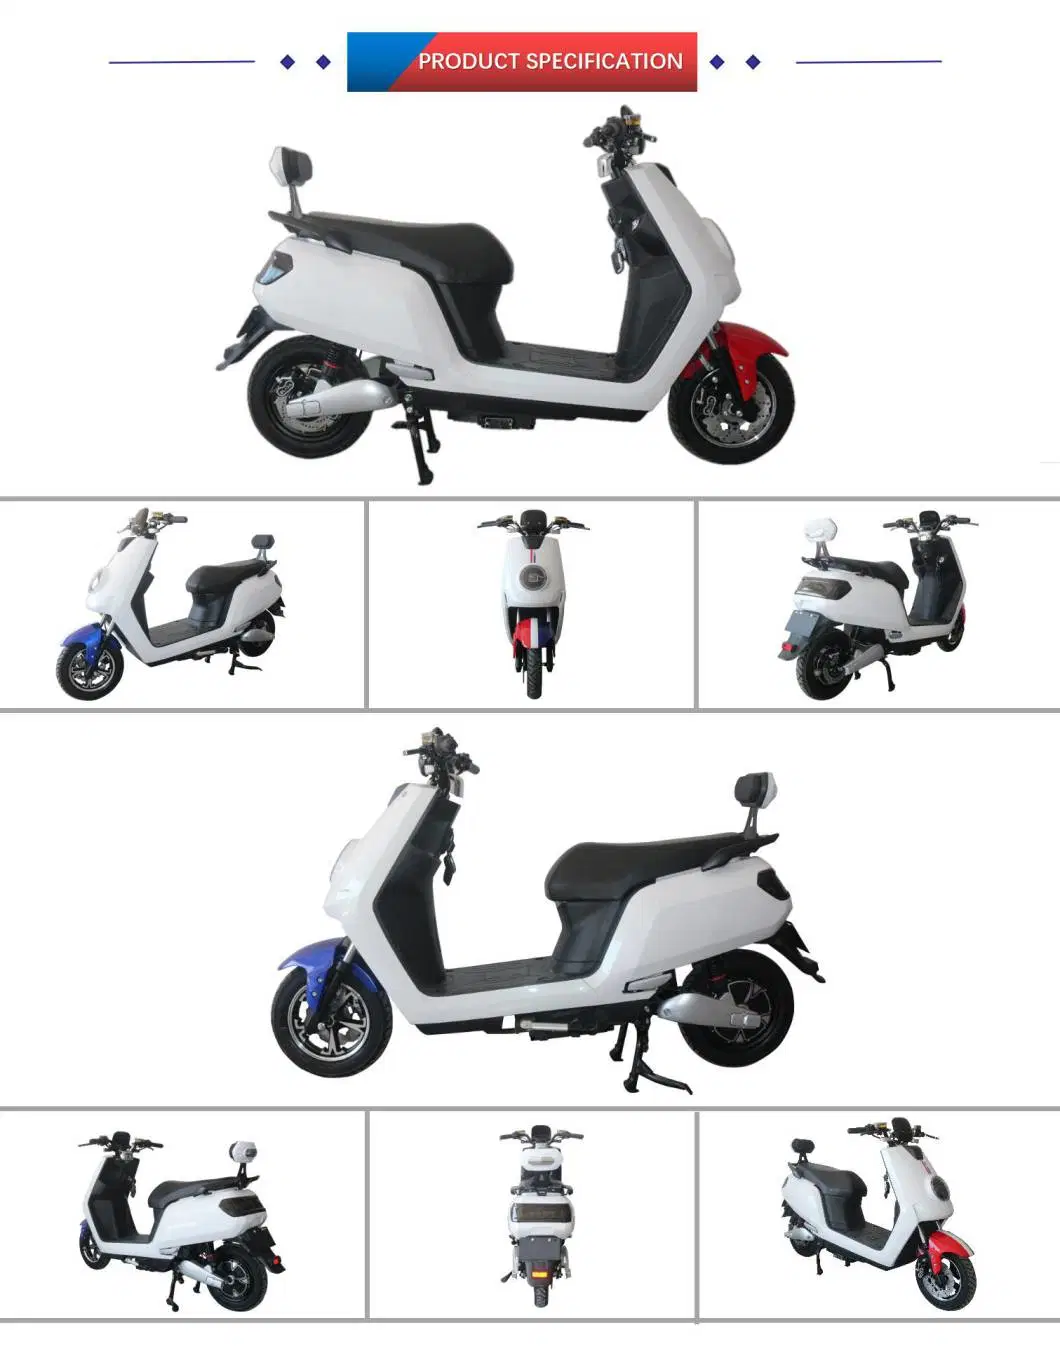 Fine High Power Customized Color Beautiful Electric Motorcycle/Electric Scooter for Woman or Man